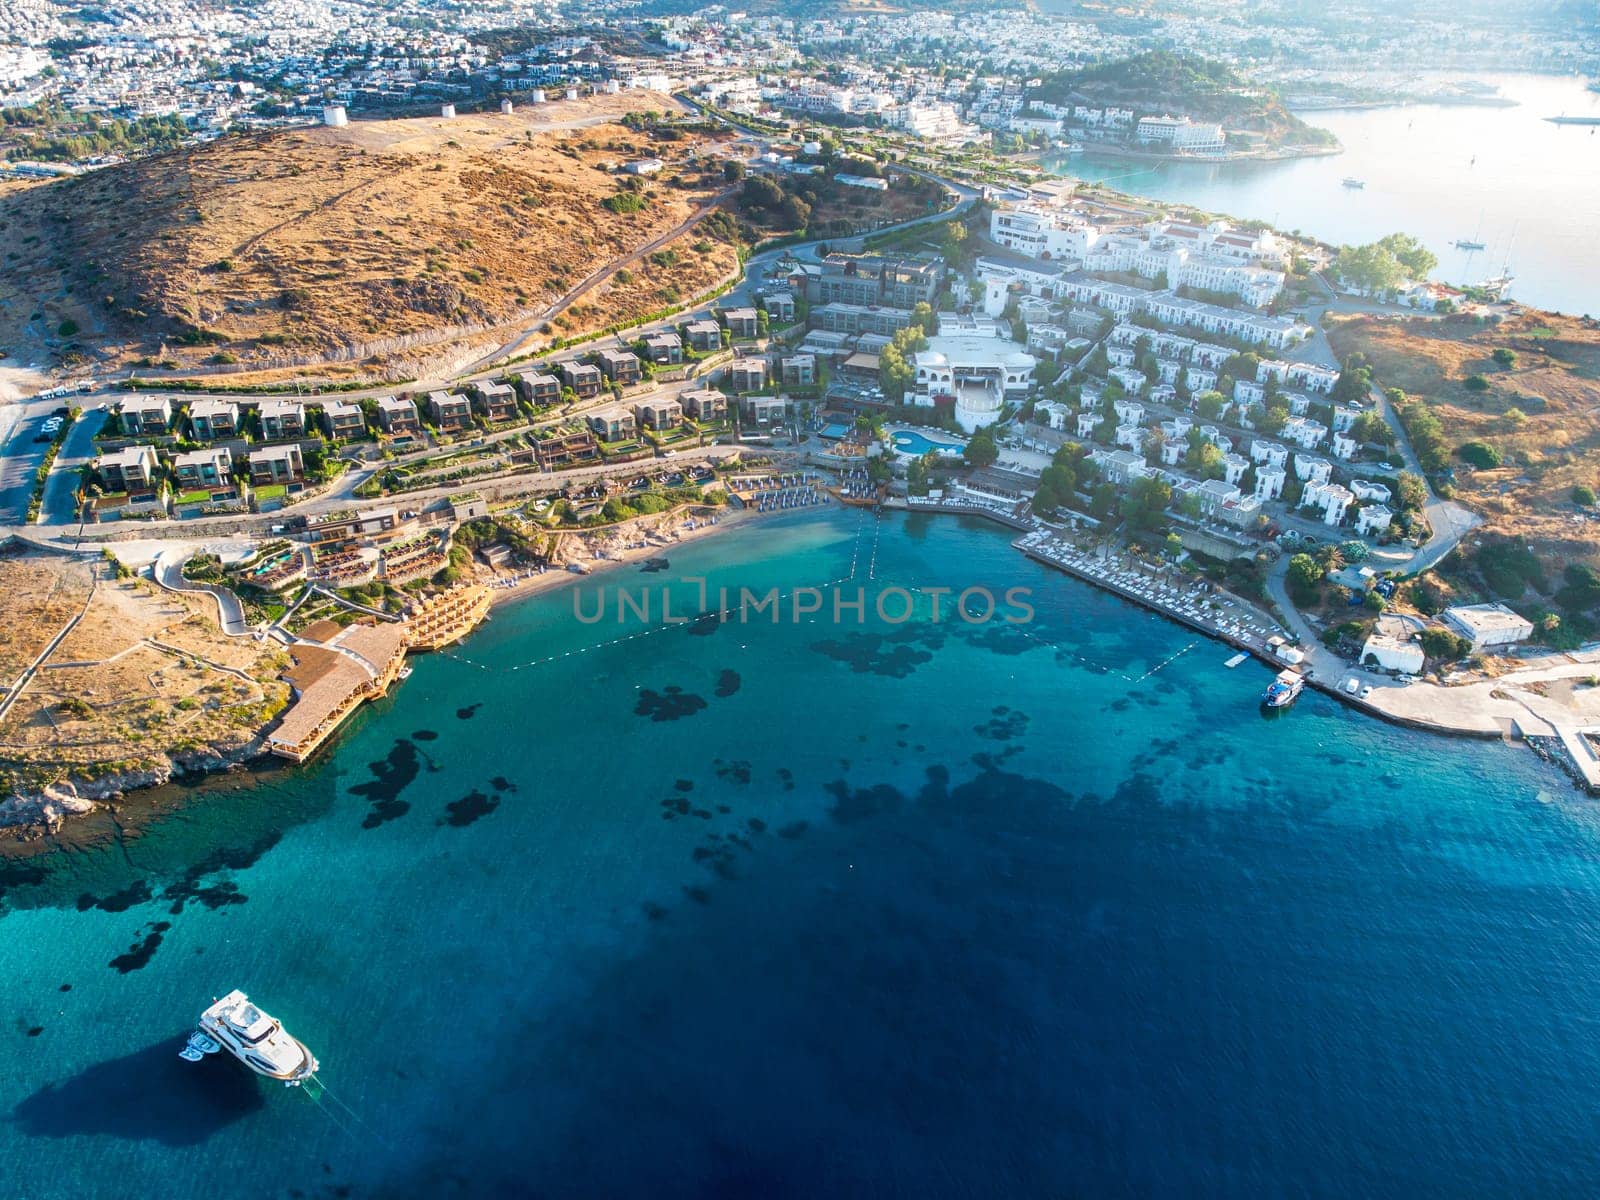 Aerial view of resort villa layout on the hill, yacht in the sea lagoon, beach surrounded by turquoise sea and hills. Beautiful beach from top. Aegean sea in Turkey. Aerial beautiful coast landscape download photo